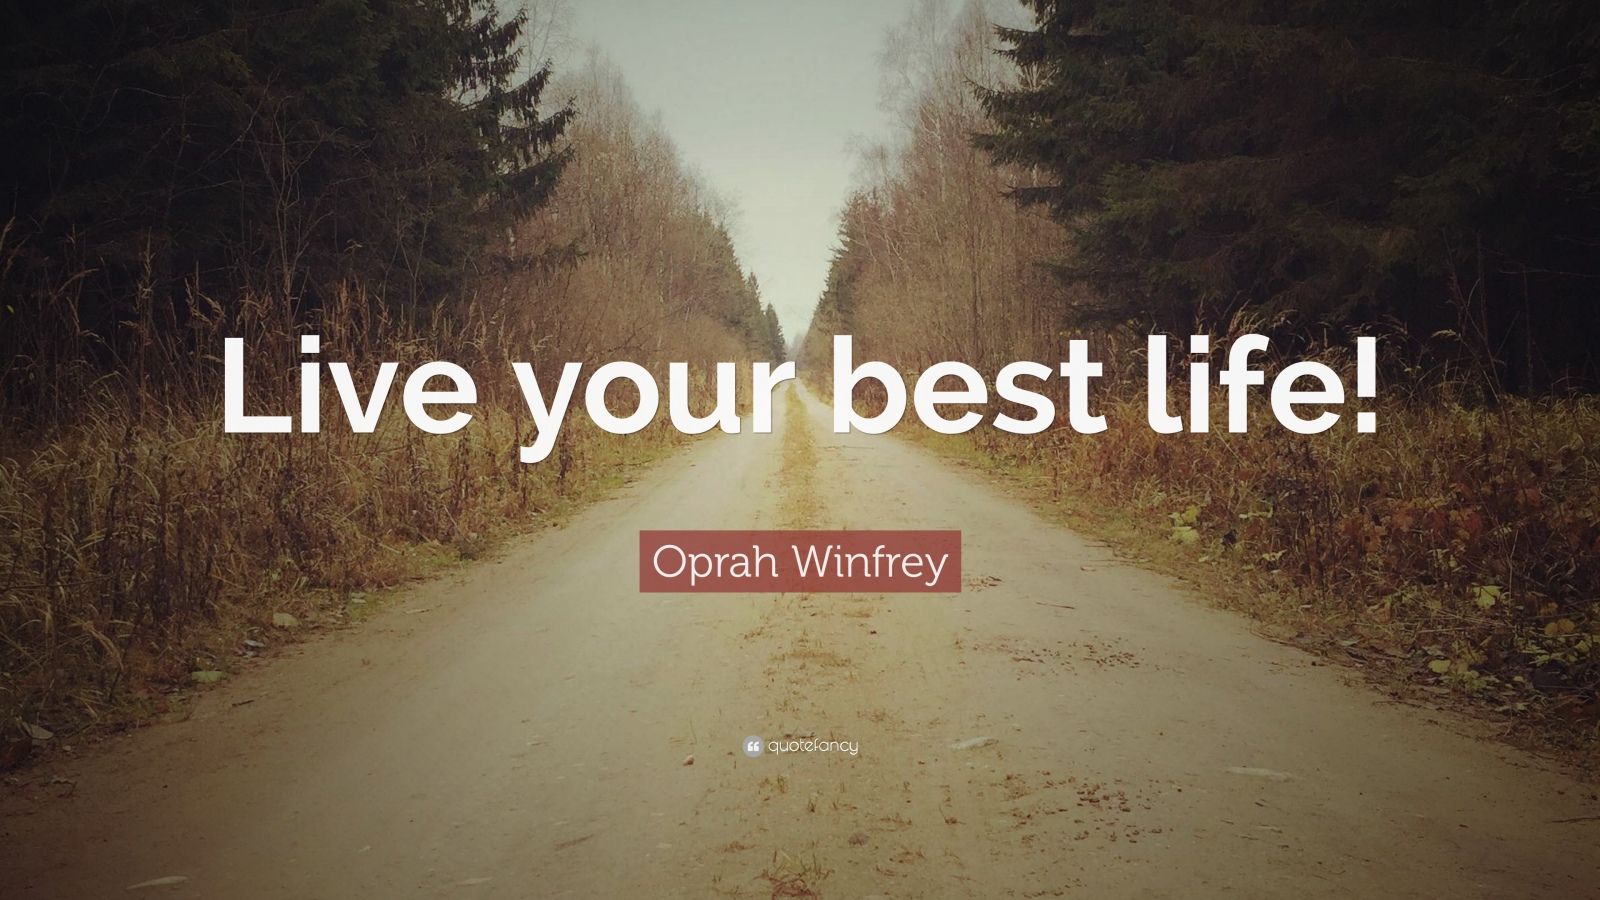 Oprah Winfrey Quote “Live your best life!” (7 wallpapers